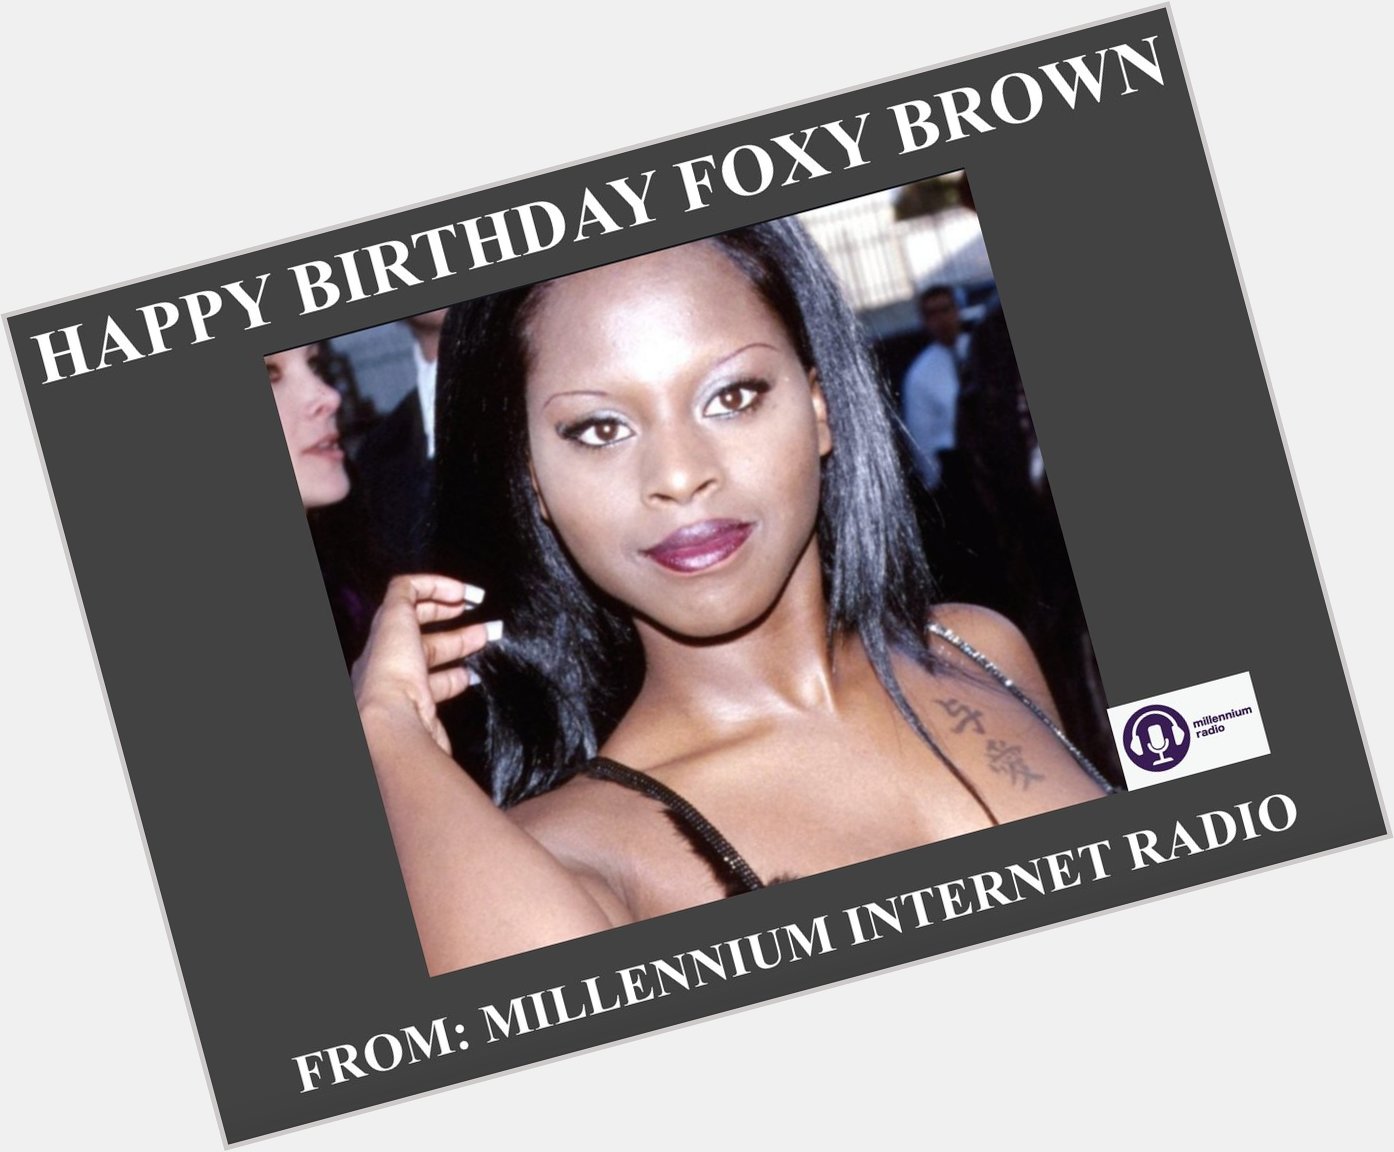 Happy Birthday to rapper Foxy Brown!! 